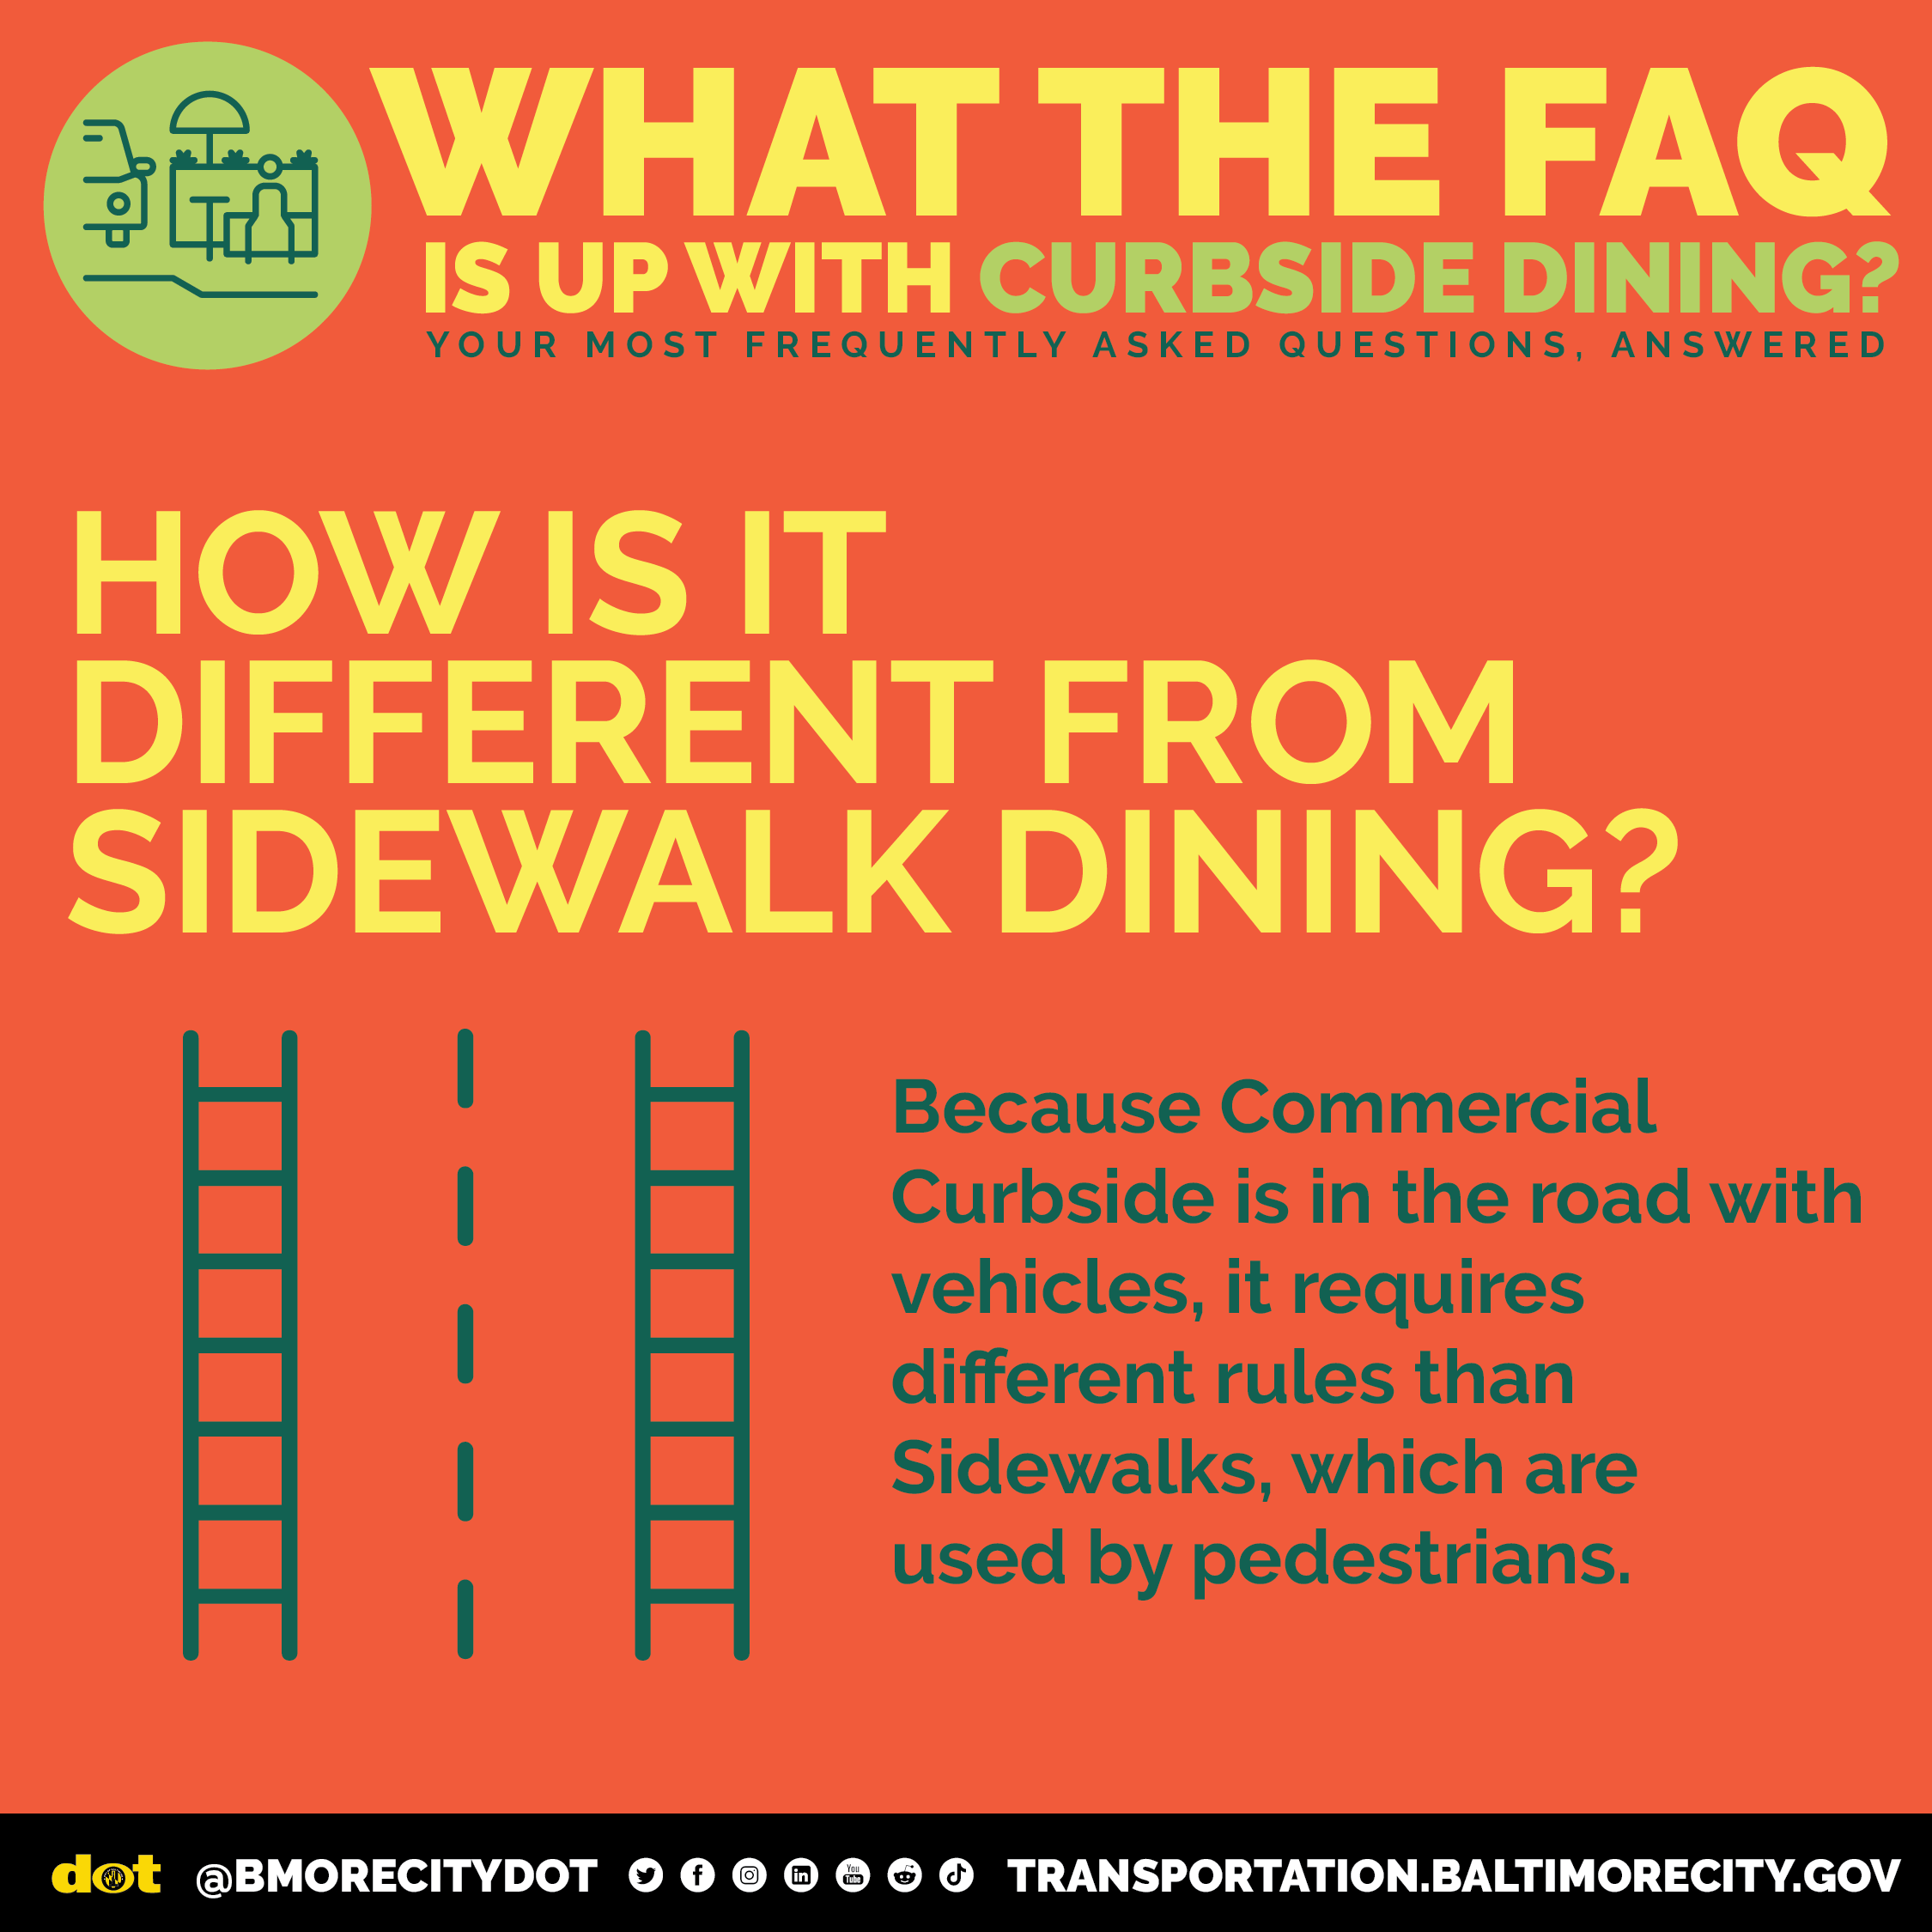 How is it different from sidewalk dining?